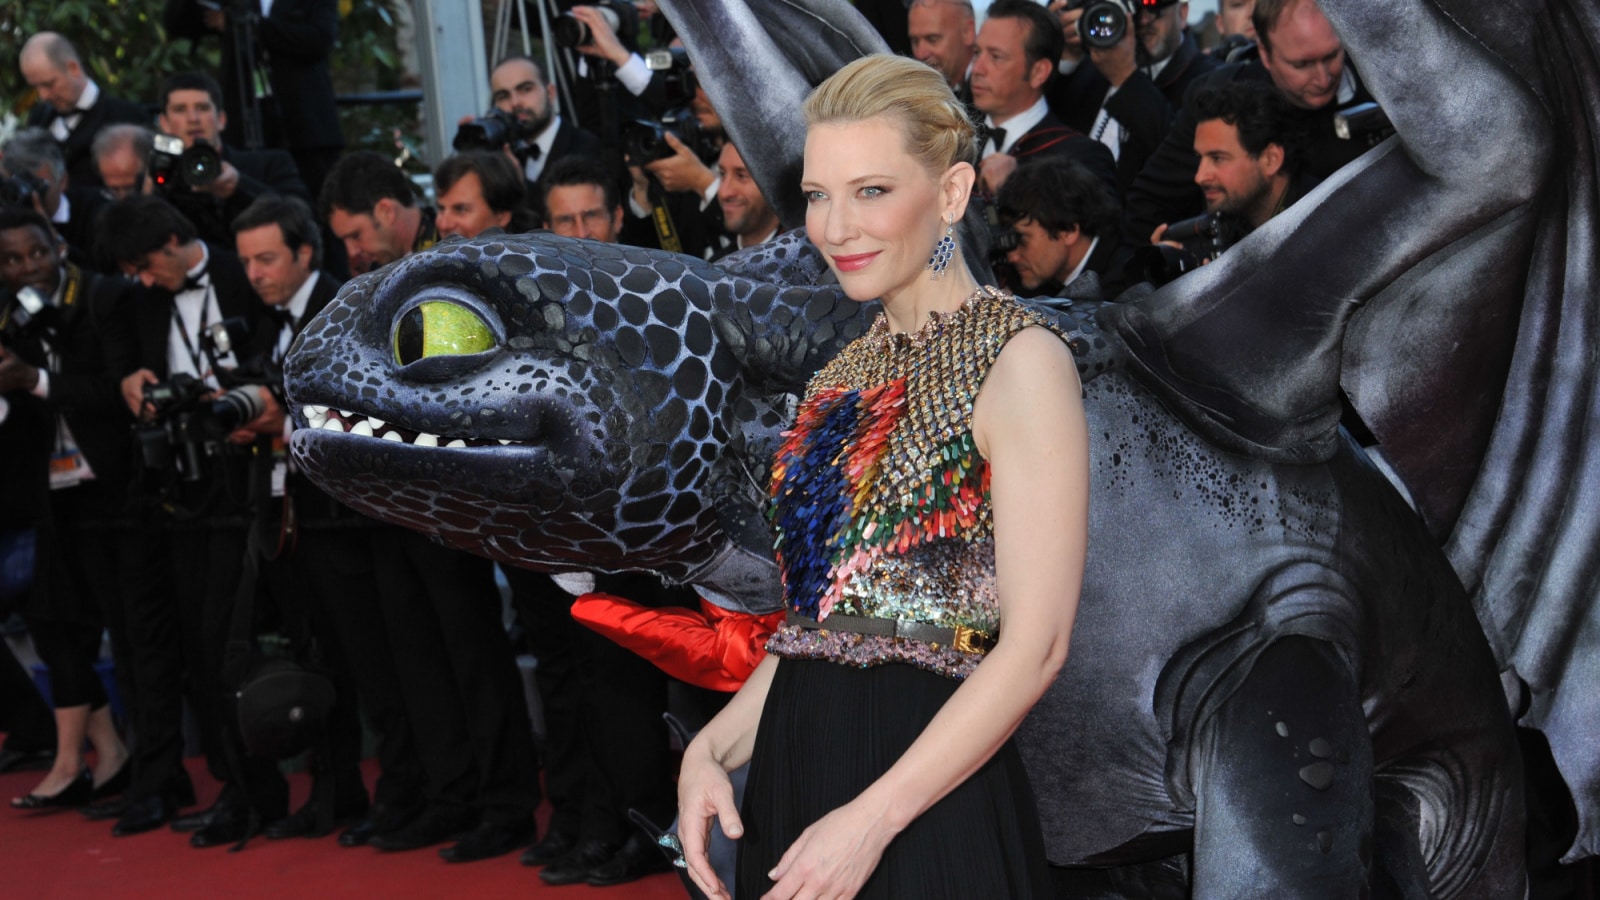 CANNES, FRANCE - MAY 16, 2014: Cate Blanchett at the gala premiere of her movie "How To Train Your Dragon 2" at the 67th Festival de Cannes.